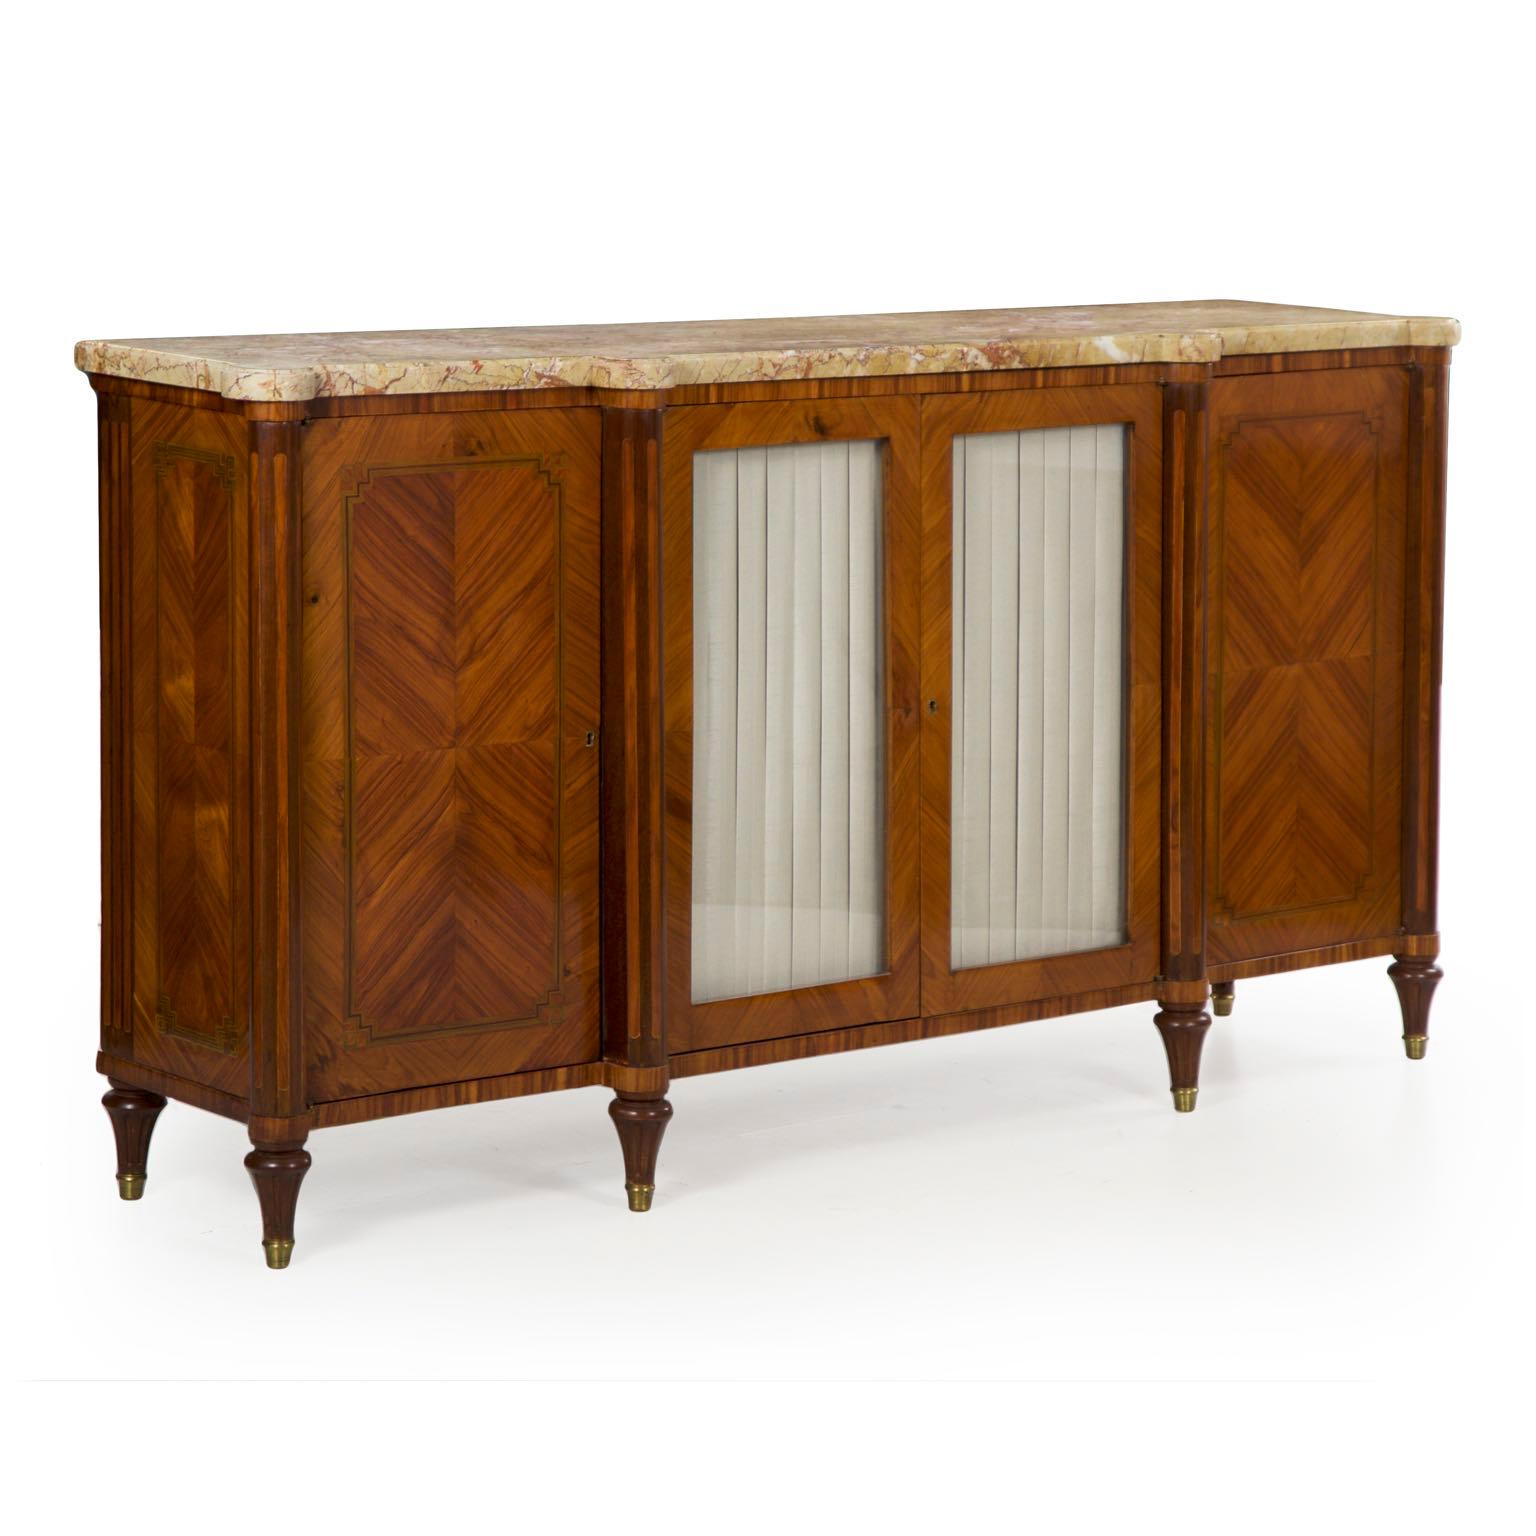 This beautiful French Louis XVI style server is a product of the last quarter of the 19th century, carefully inlaid with matched grain marquetry displays in the doors and exotic fruitwood set in pleasing angular arrays. The thick marble top is